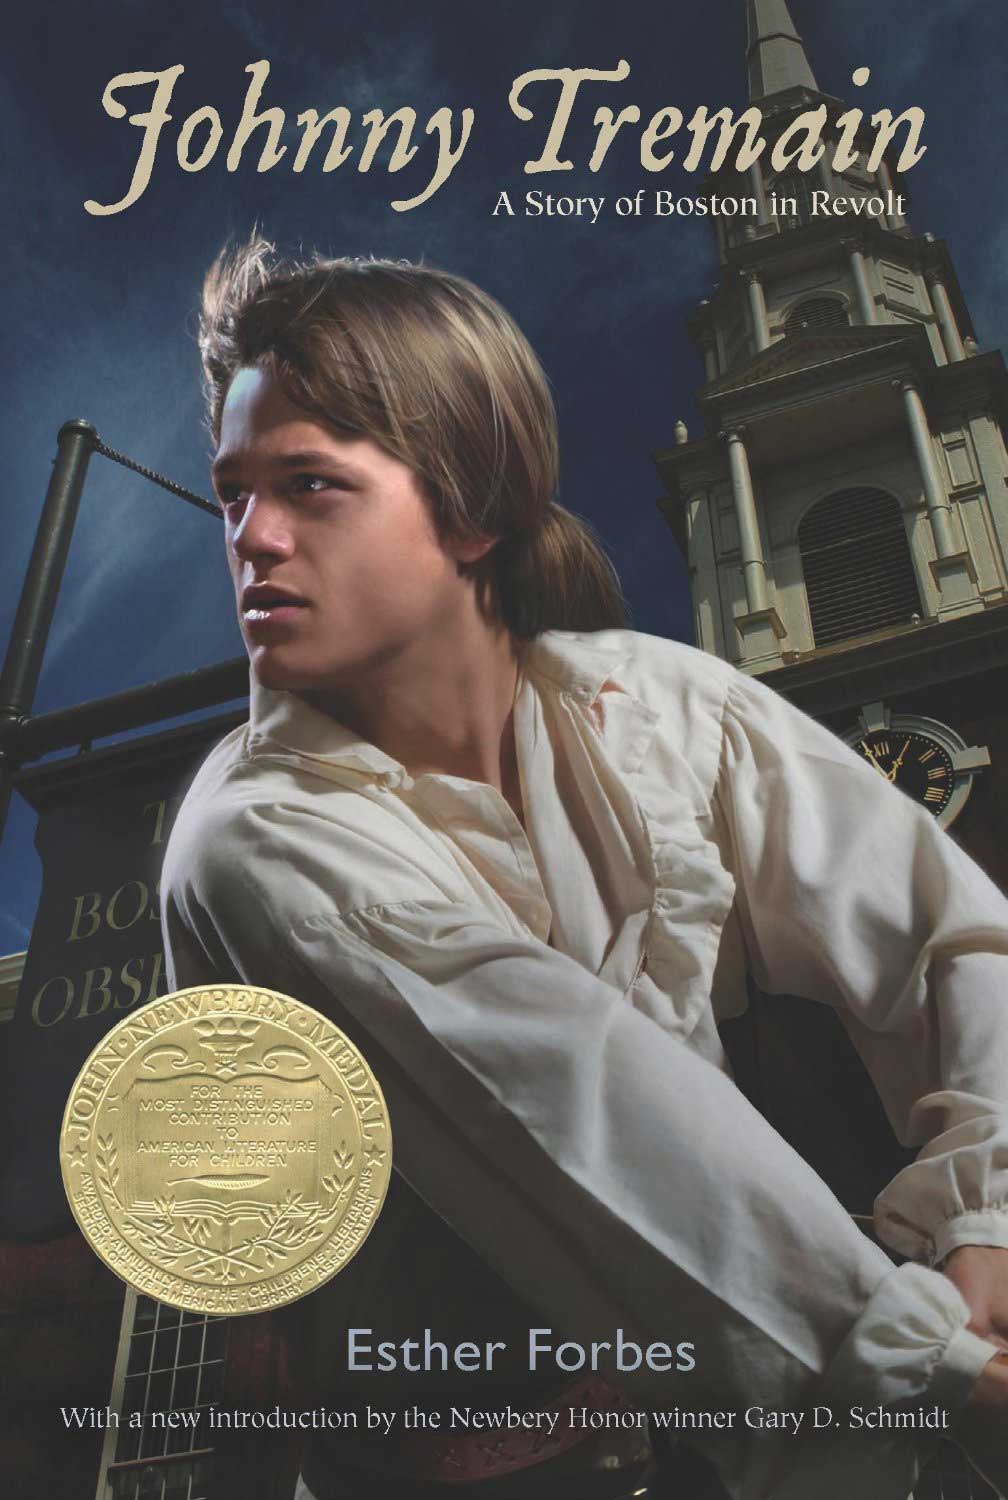 Johnny Tremain, by Esther Forbes.
                              
                              
                              
                              Young Johnny Tremain is caught up in the fervor of the American Revolution.
                              
                              
                              
                              Buy now: Johnny Tremain